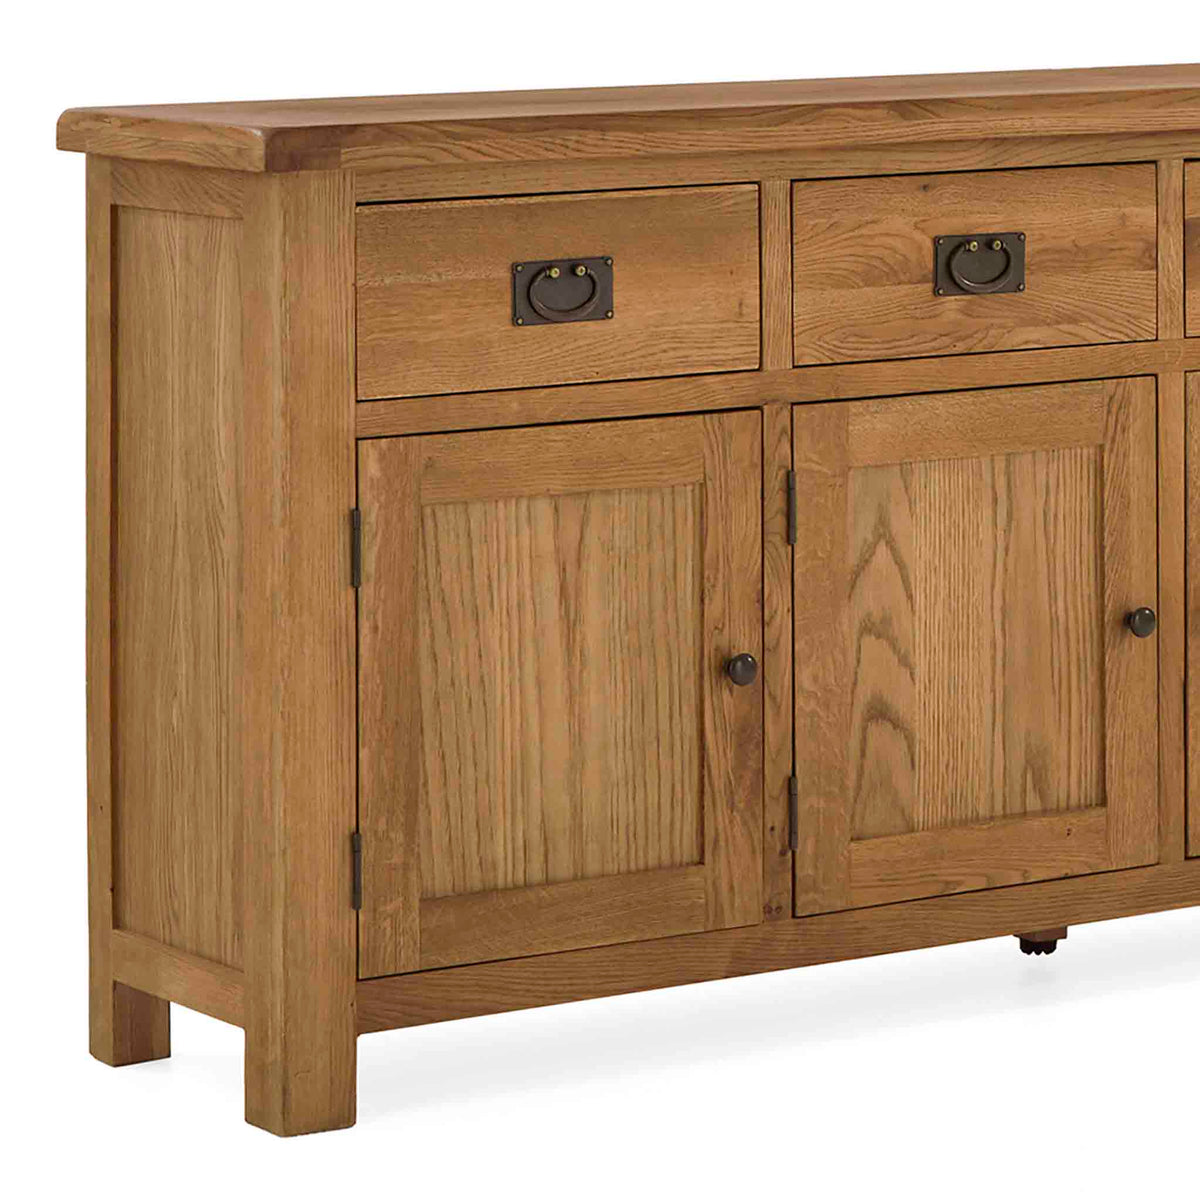 Zelah Oak Extra Large Sideboard - Close up of front of drawers and cupboard